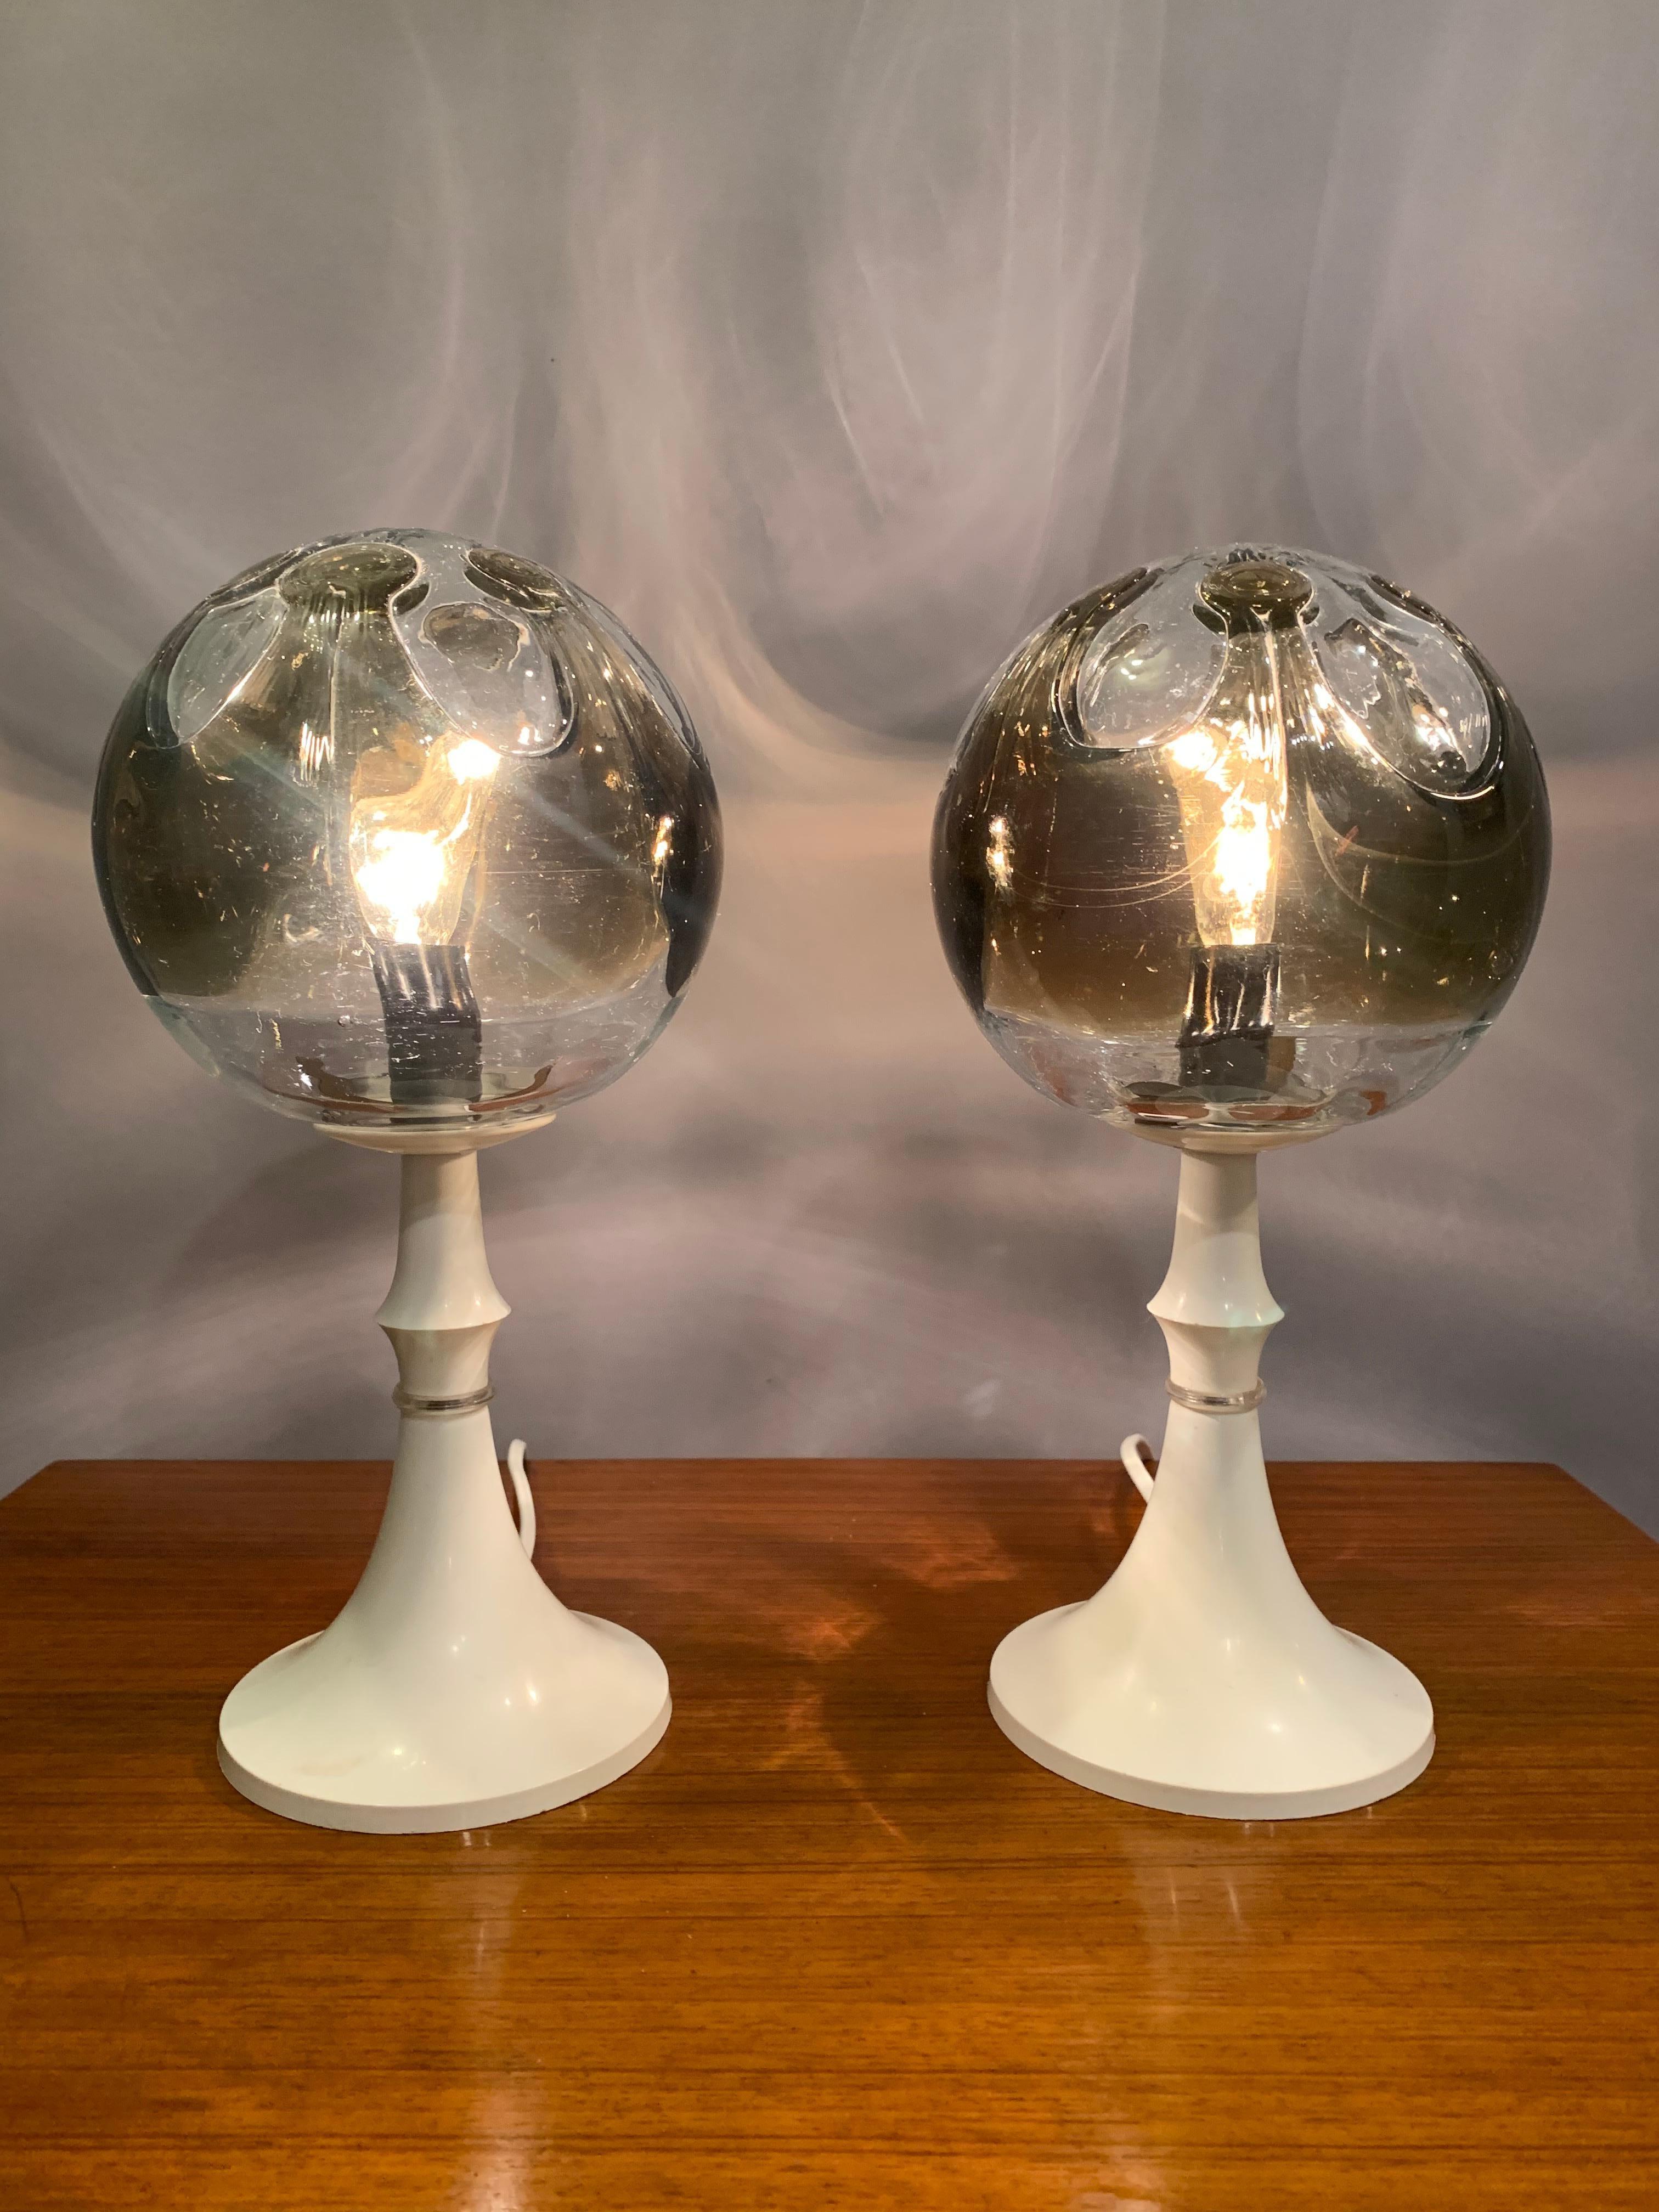 An unusual and rare pair of highly decorative 1960s Kaiser Leuchten table lamps in very good vintage condition. A single hand blown Mazzega clear crystal and smoked glass globe sits on a white plastic formed conical base. Some small signs of age